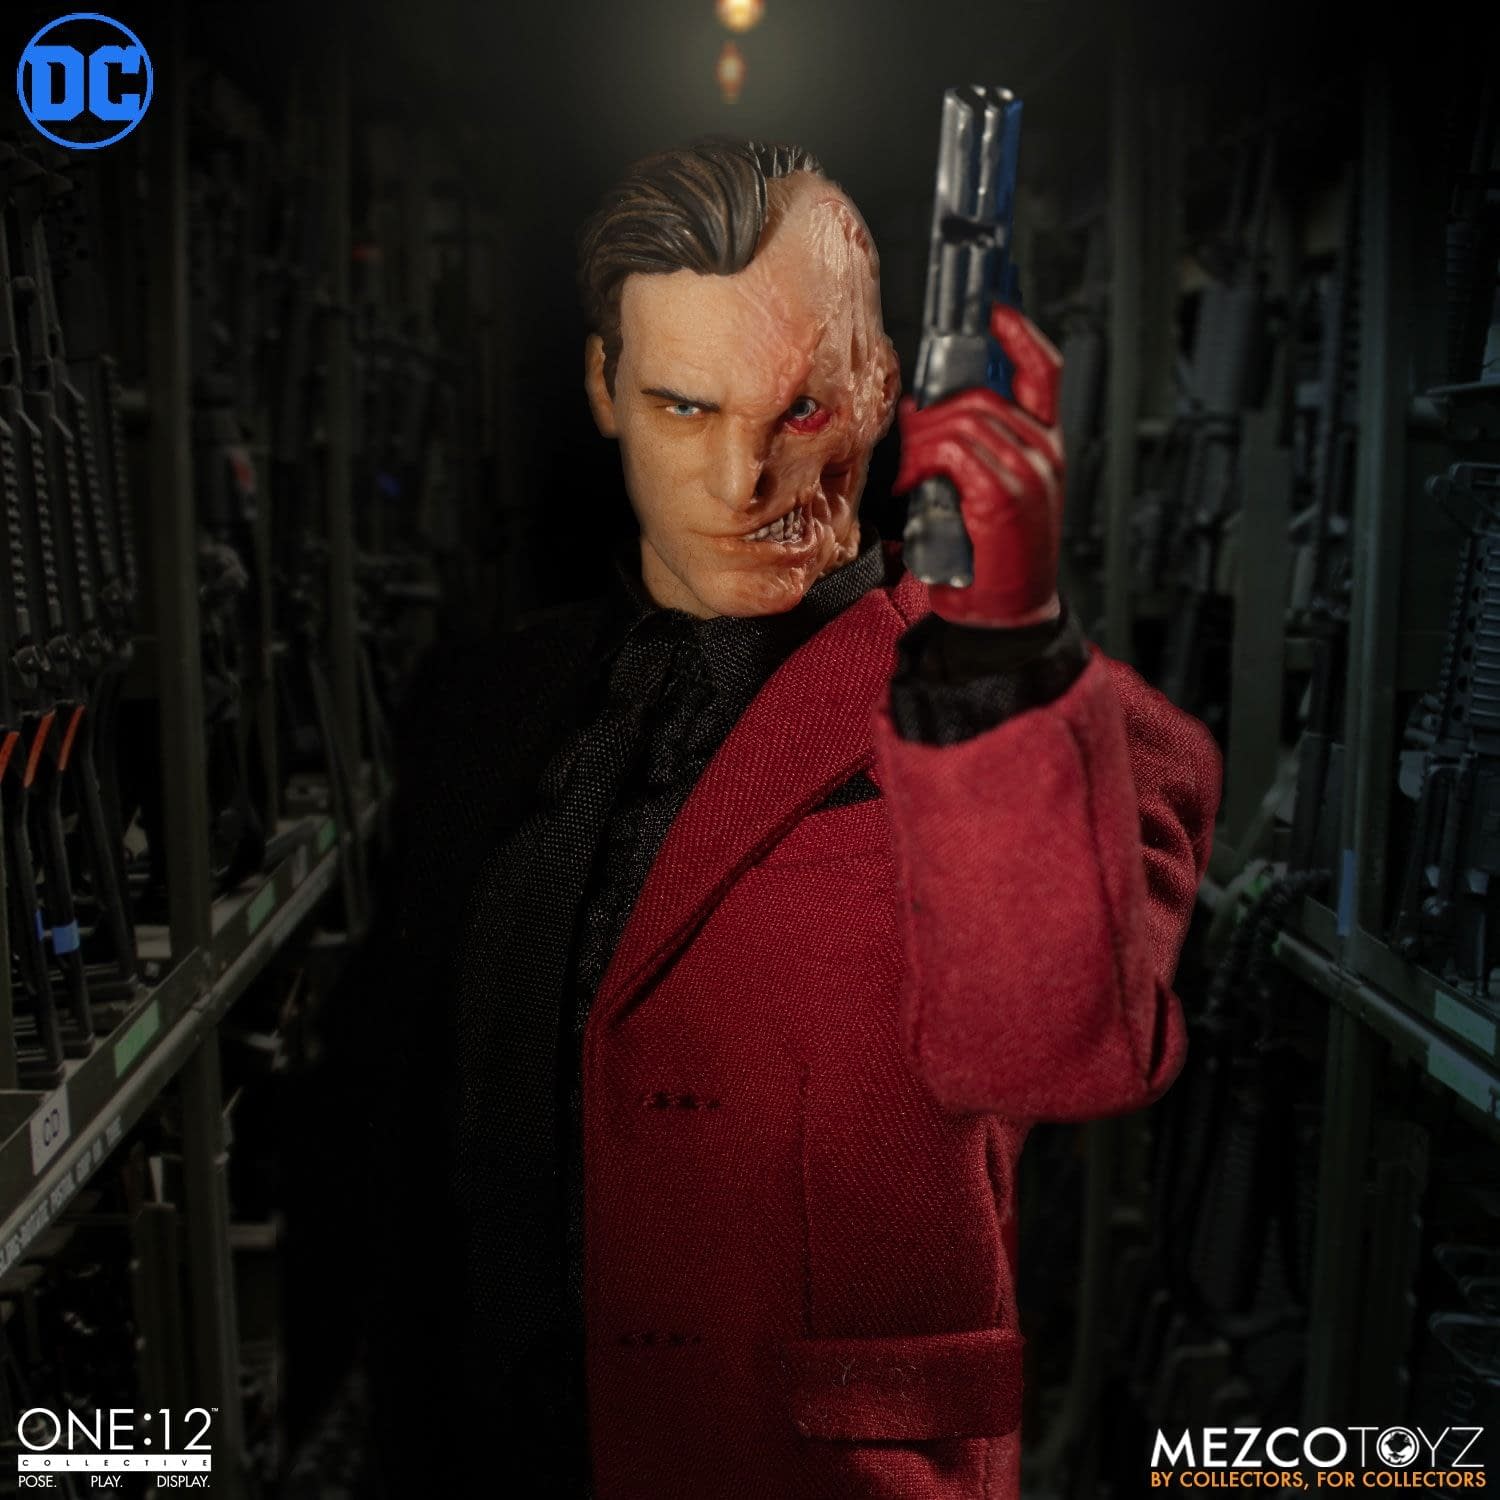 Two-Face Tries His Luck With New Mezco Toys One:12 Figure